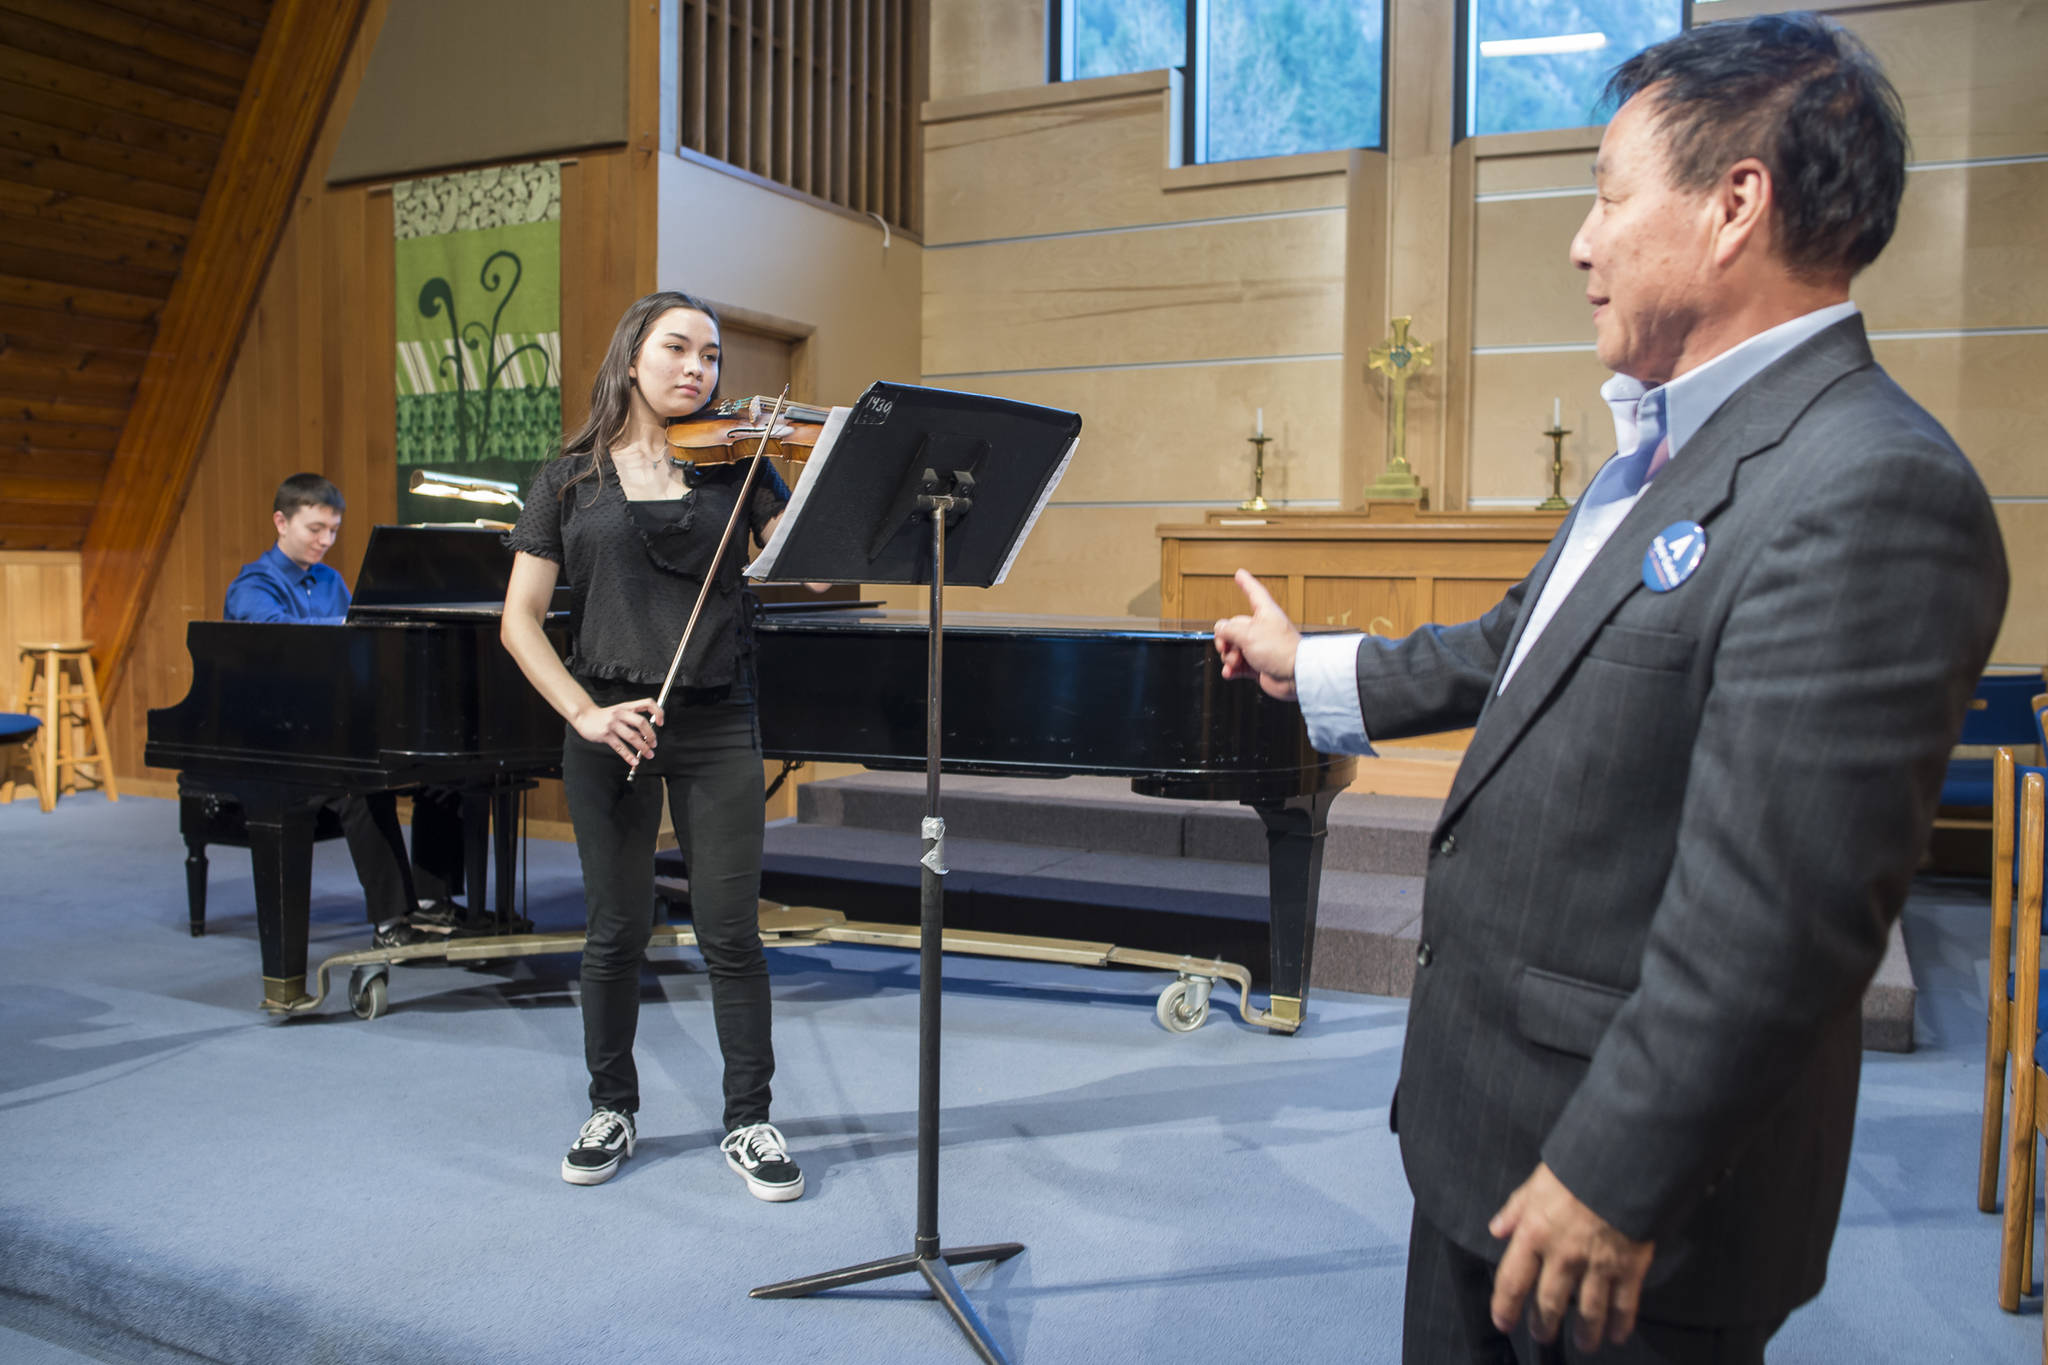 Violin instructor Guo Hua Xia, right, listens as violinist Lisa Eldridge and pianist Kyle Farley-Robinson practice their recital piece at Northern Light United Church on Friday, Sept. 21, 2018. (Michael Penn | Juneau)